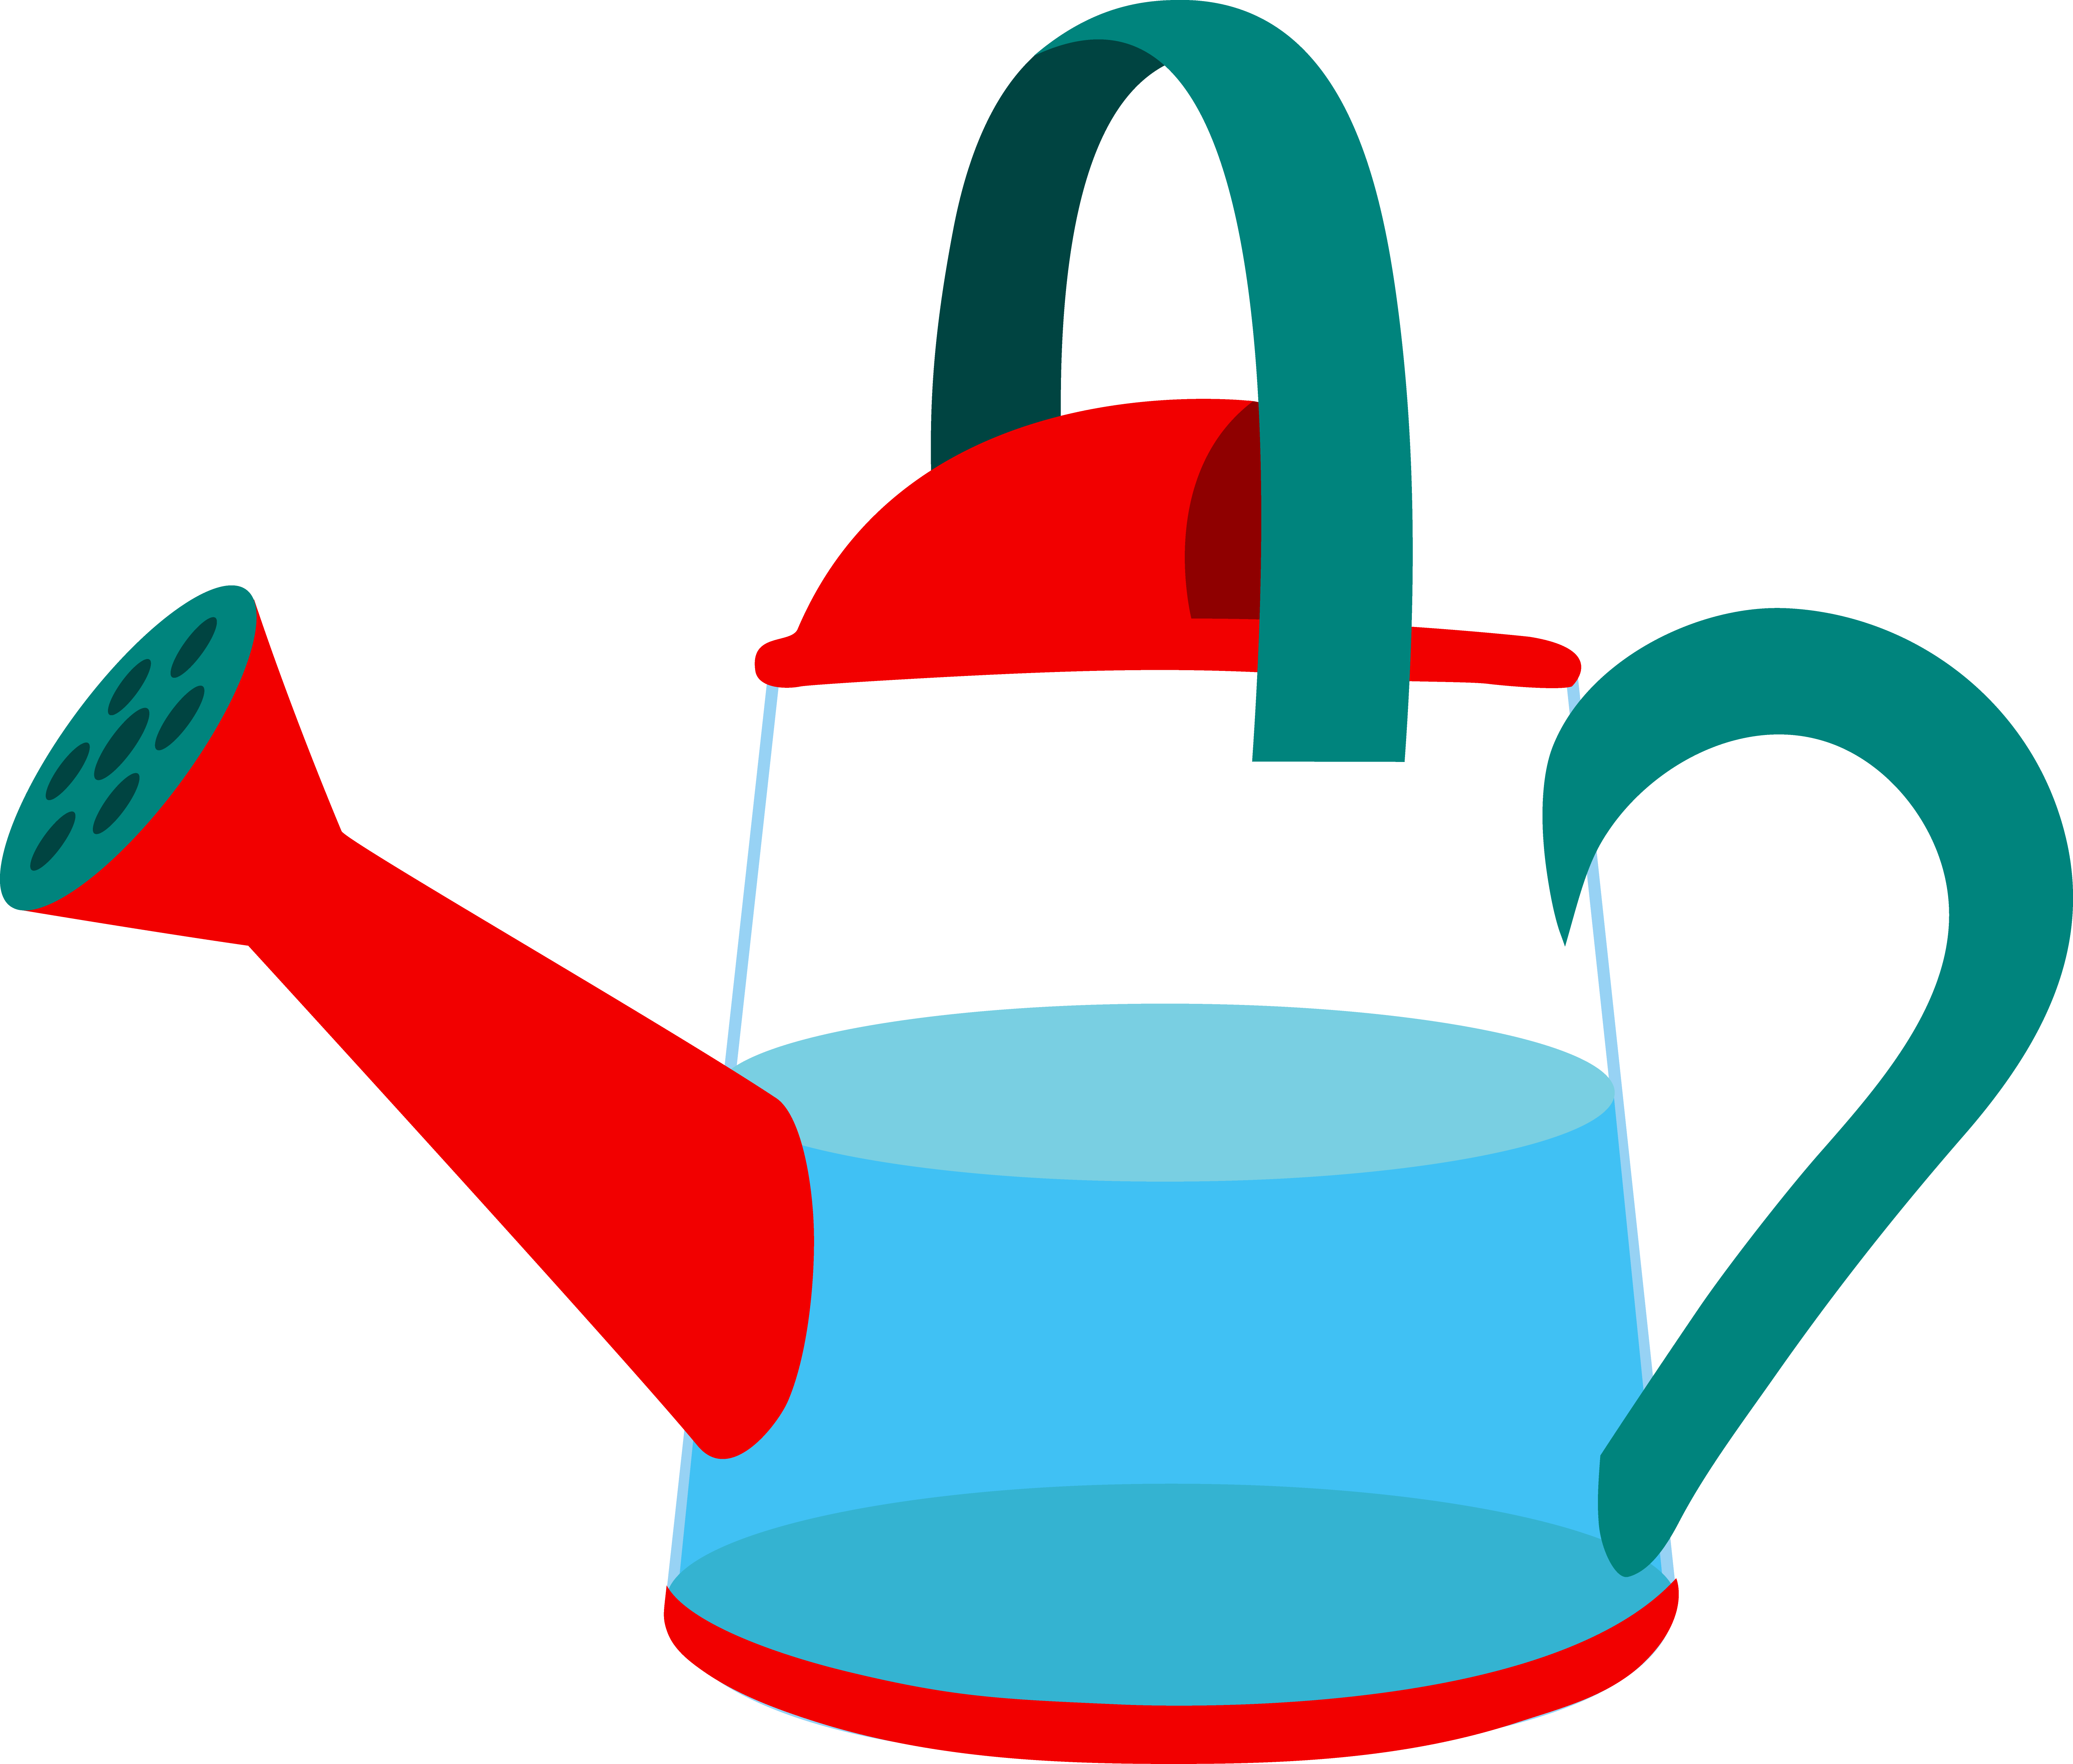 Watering pot clipart - Clipground